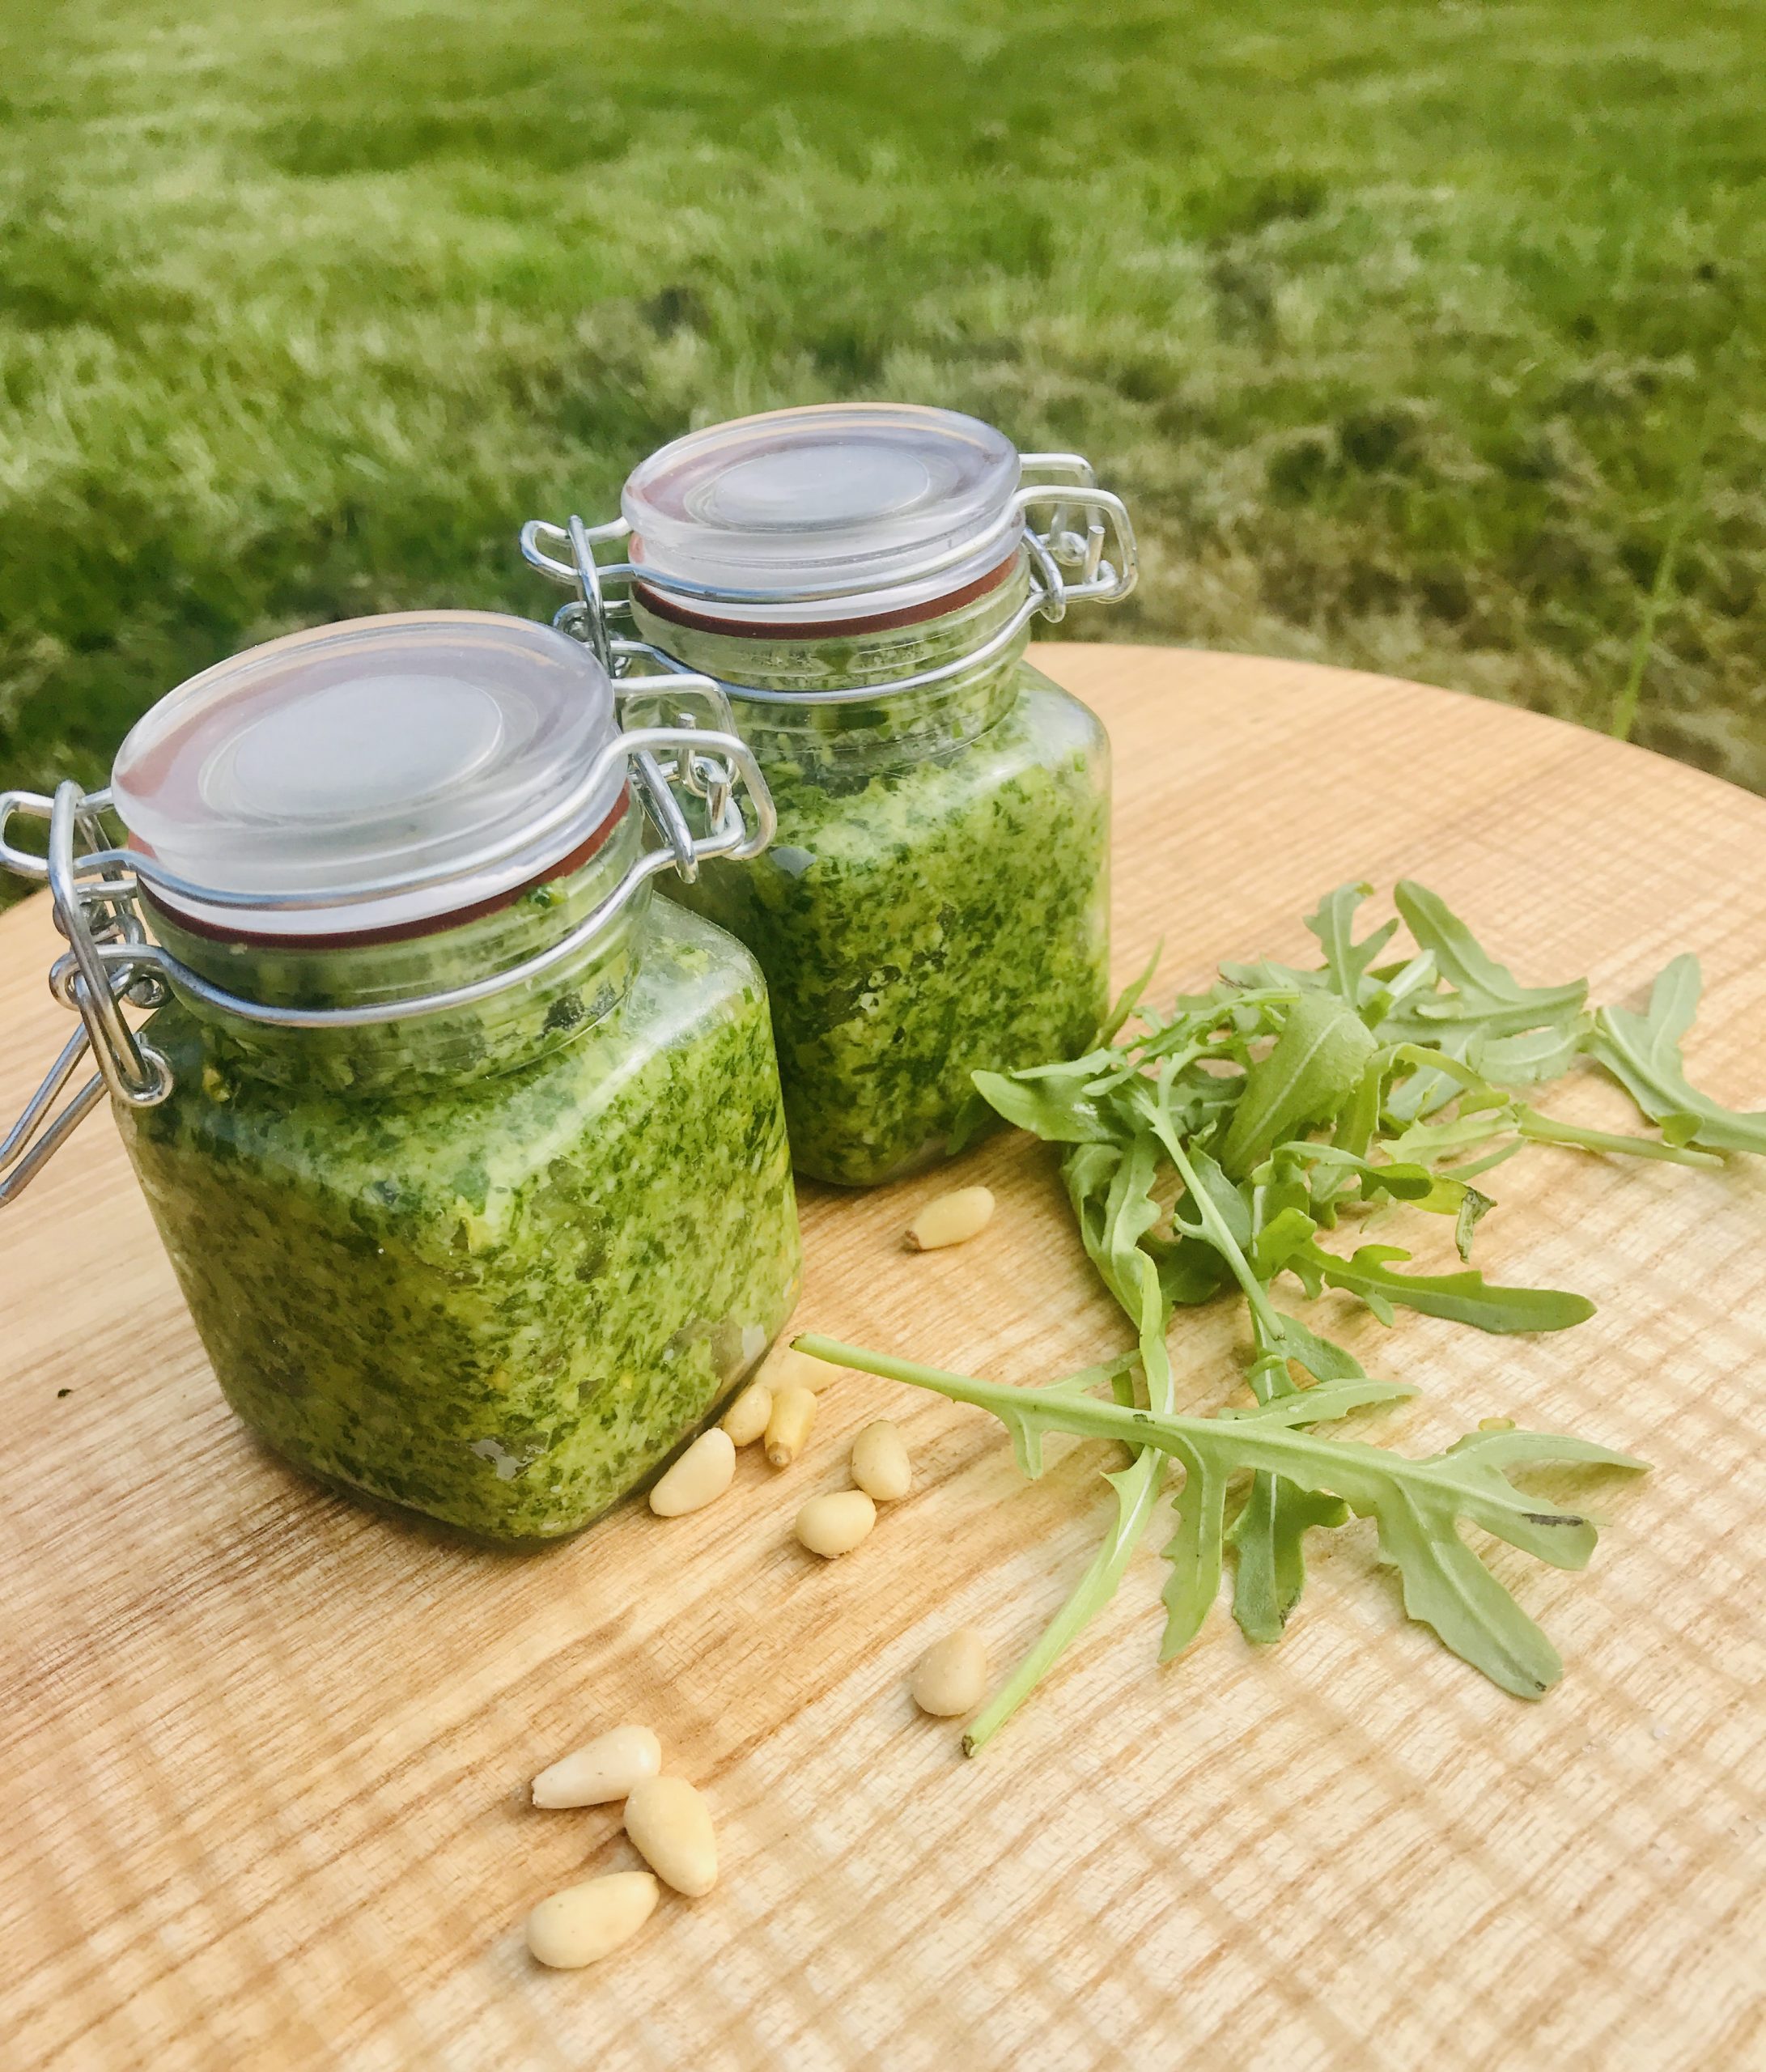 delicious basil and rocket pesto- easy to make and tasty too